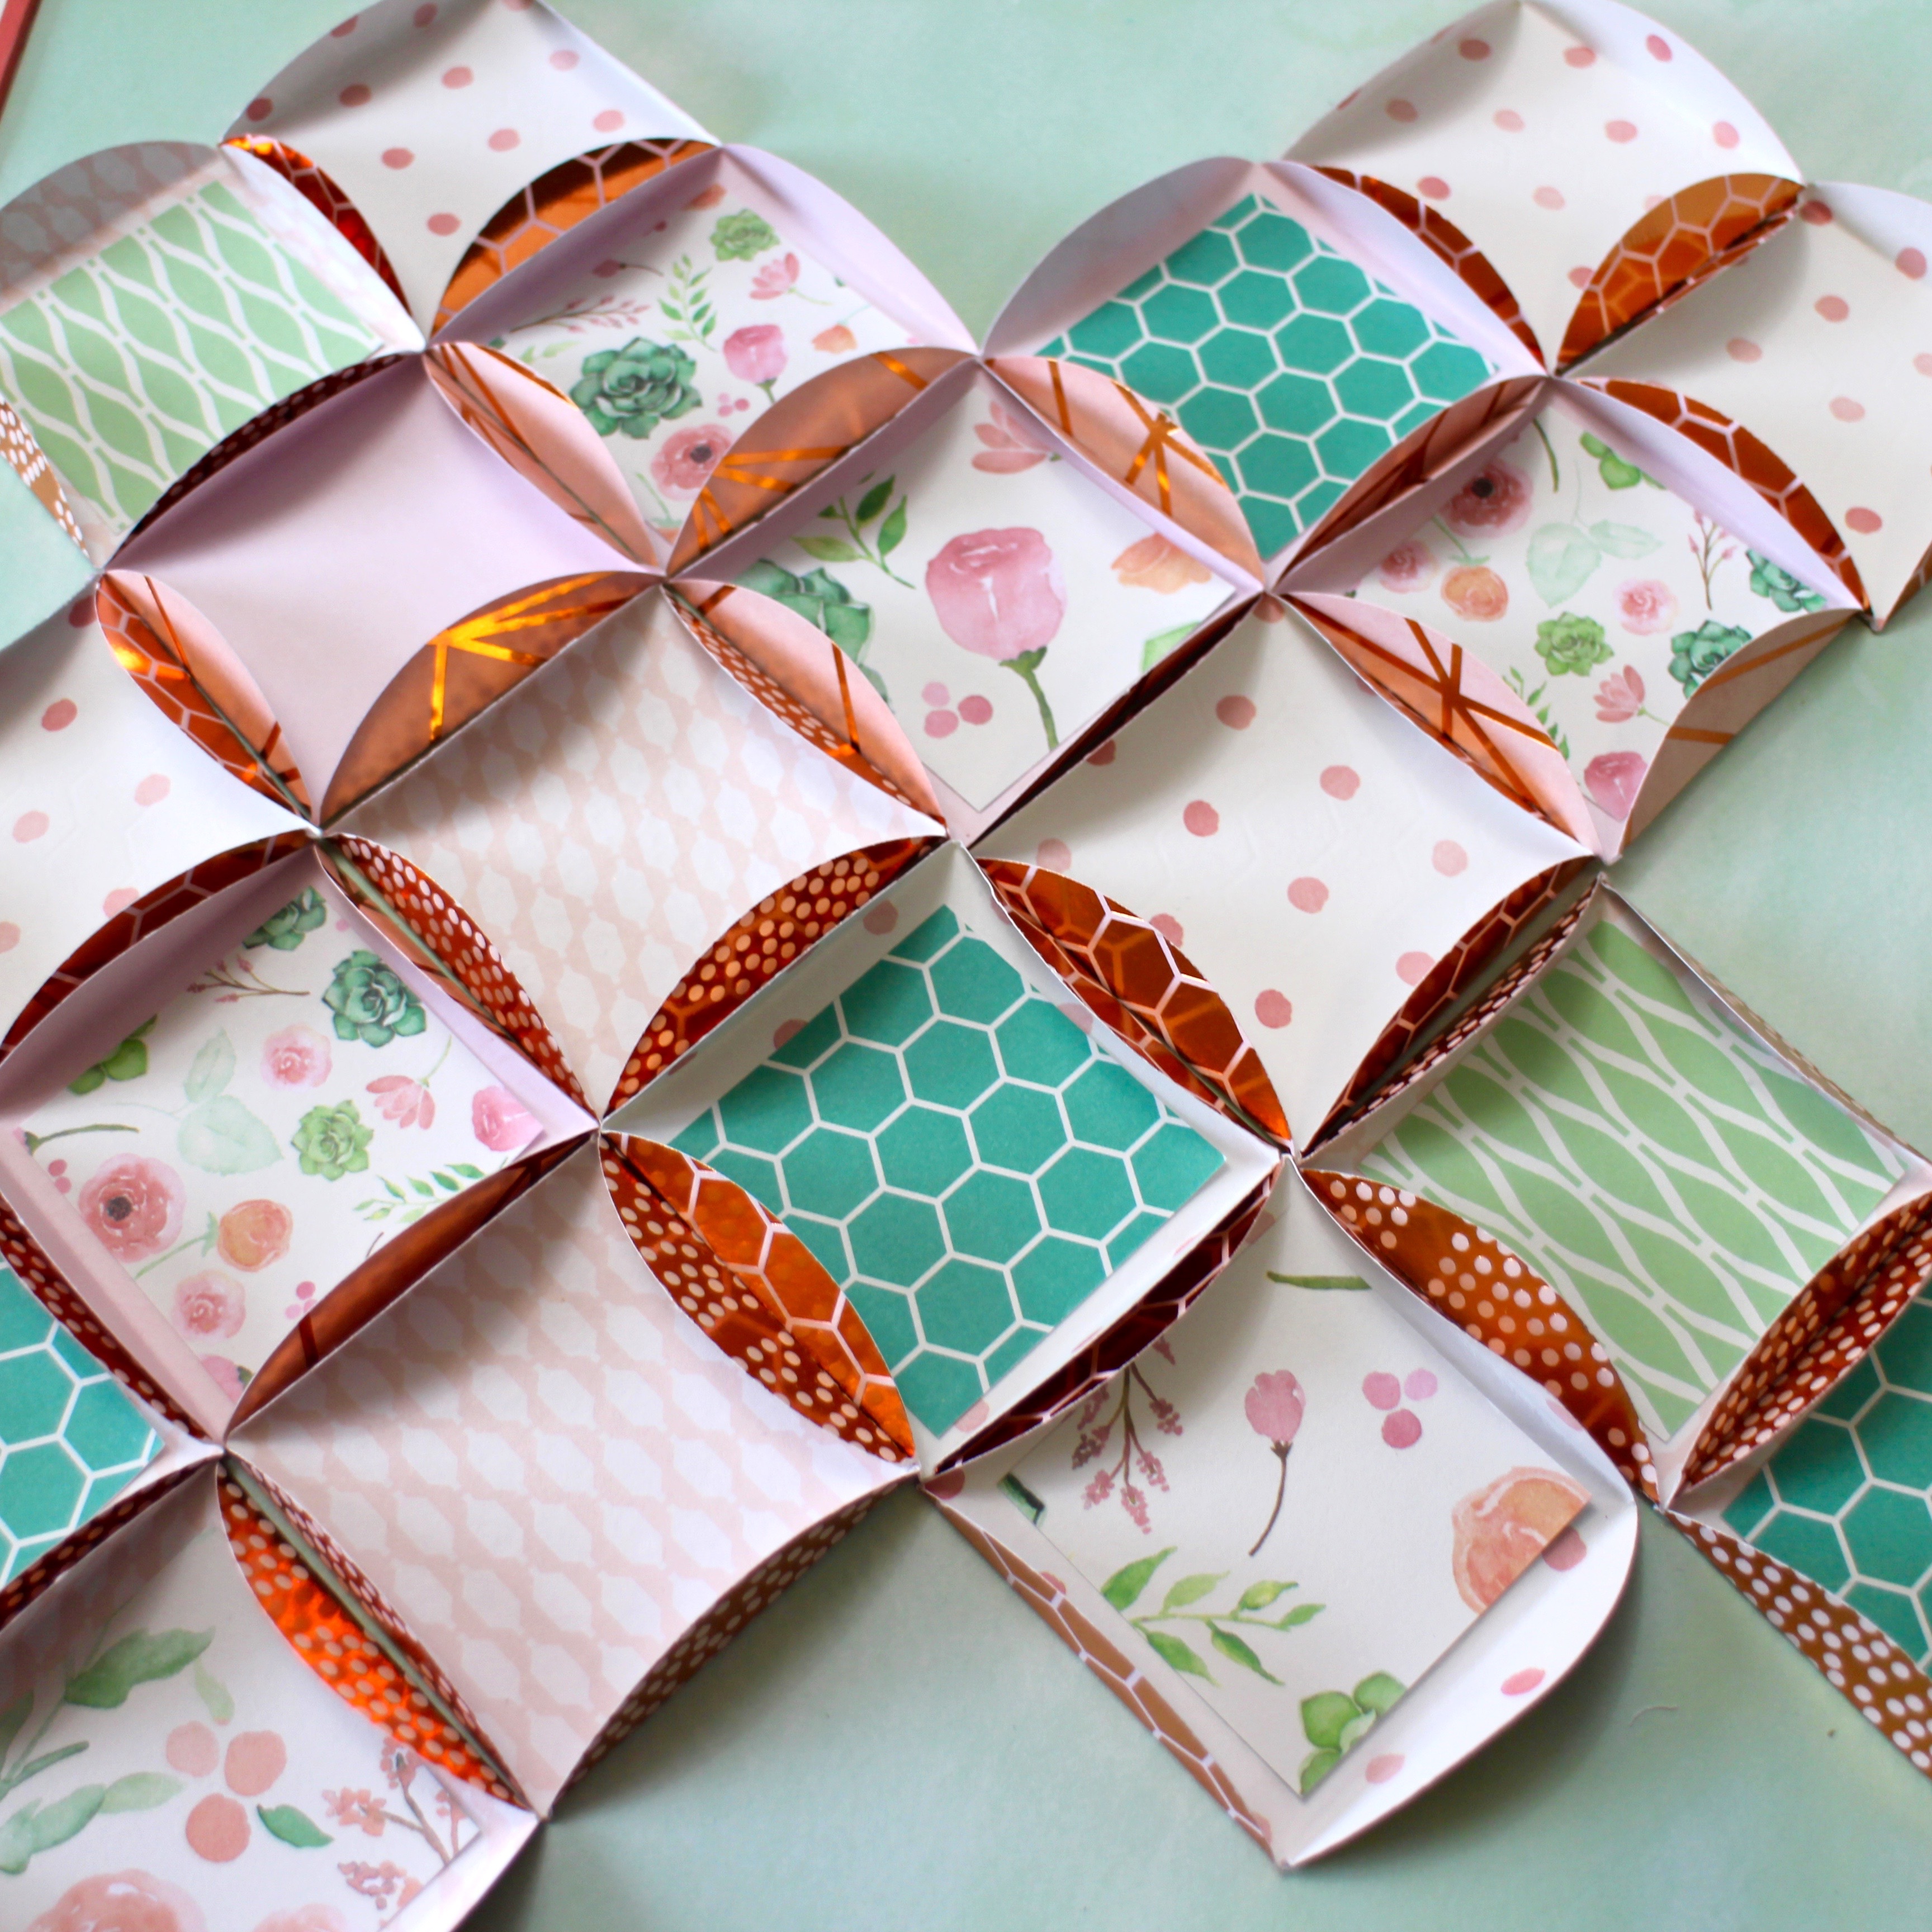 Create beautiful scrapbook wall art with your stash